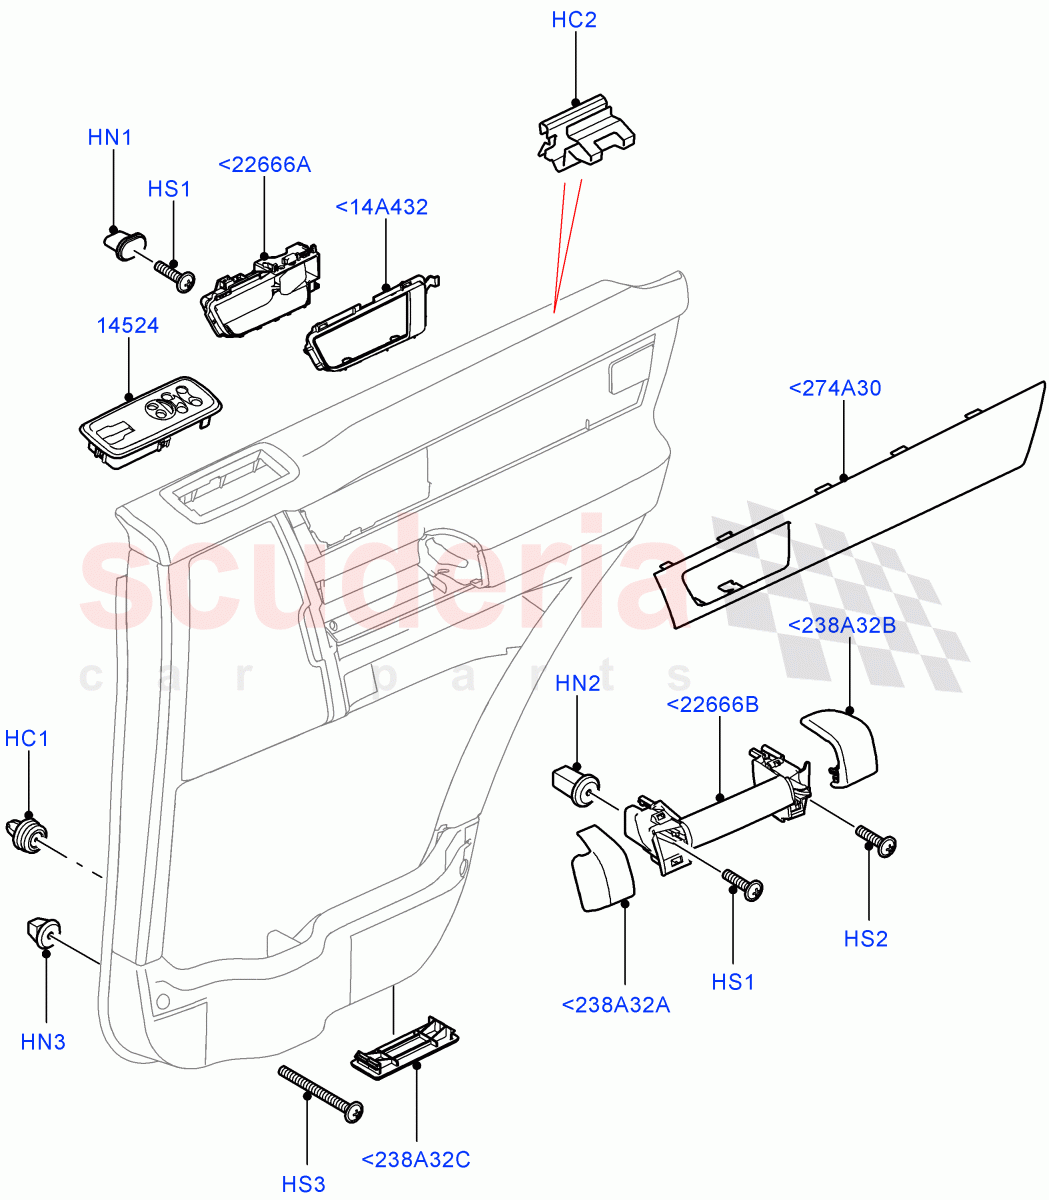 Rear Door Trim Installation((V)FROMAA000001) of Land Rover Land Rover Discovery 4 (2010-2016) [3.0 DOHC GDI SC V6 Petrol]